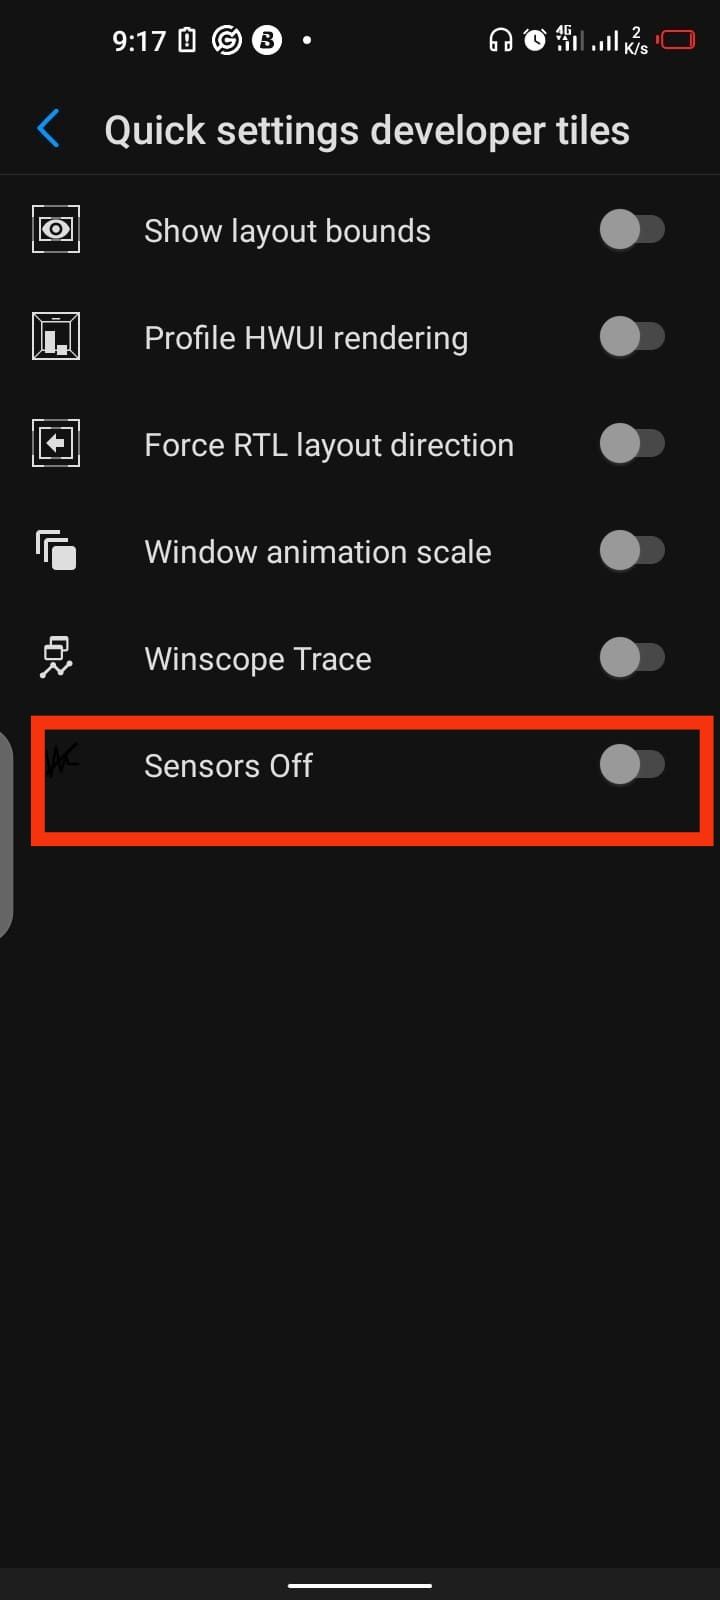 Adding sensors off shortcut to quick settings menu on Android